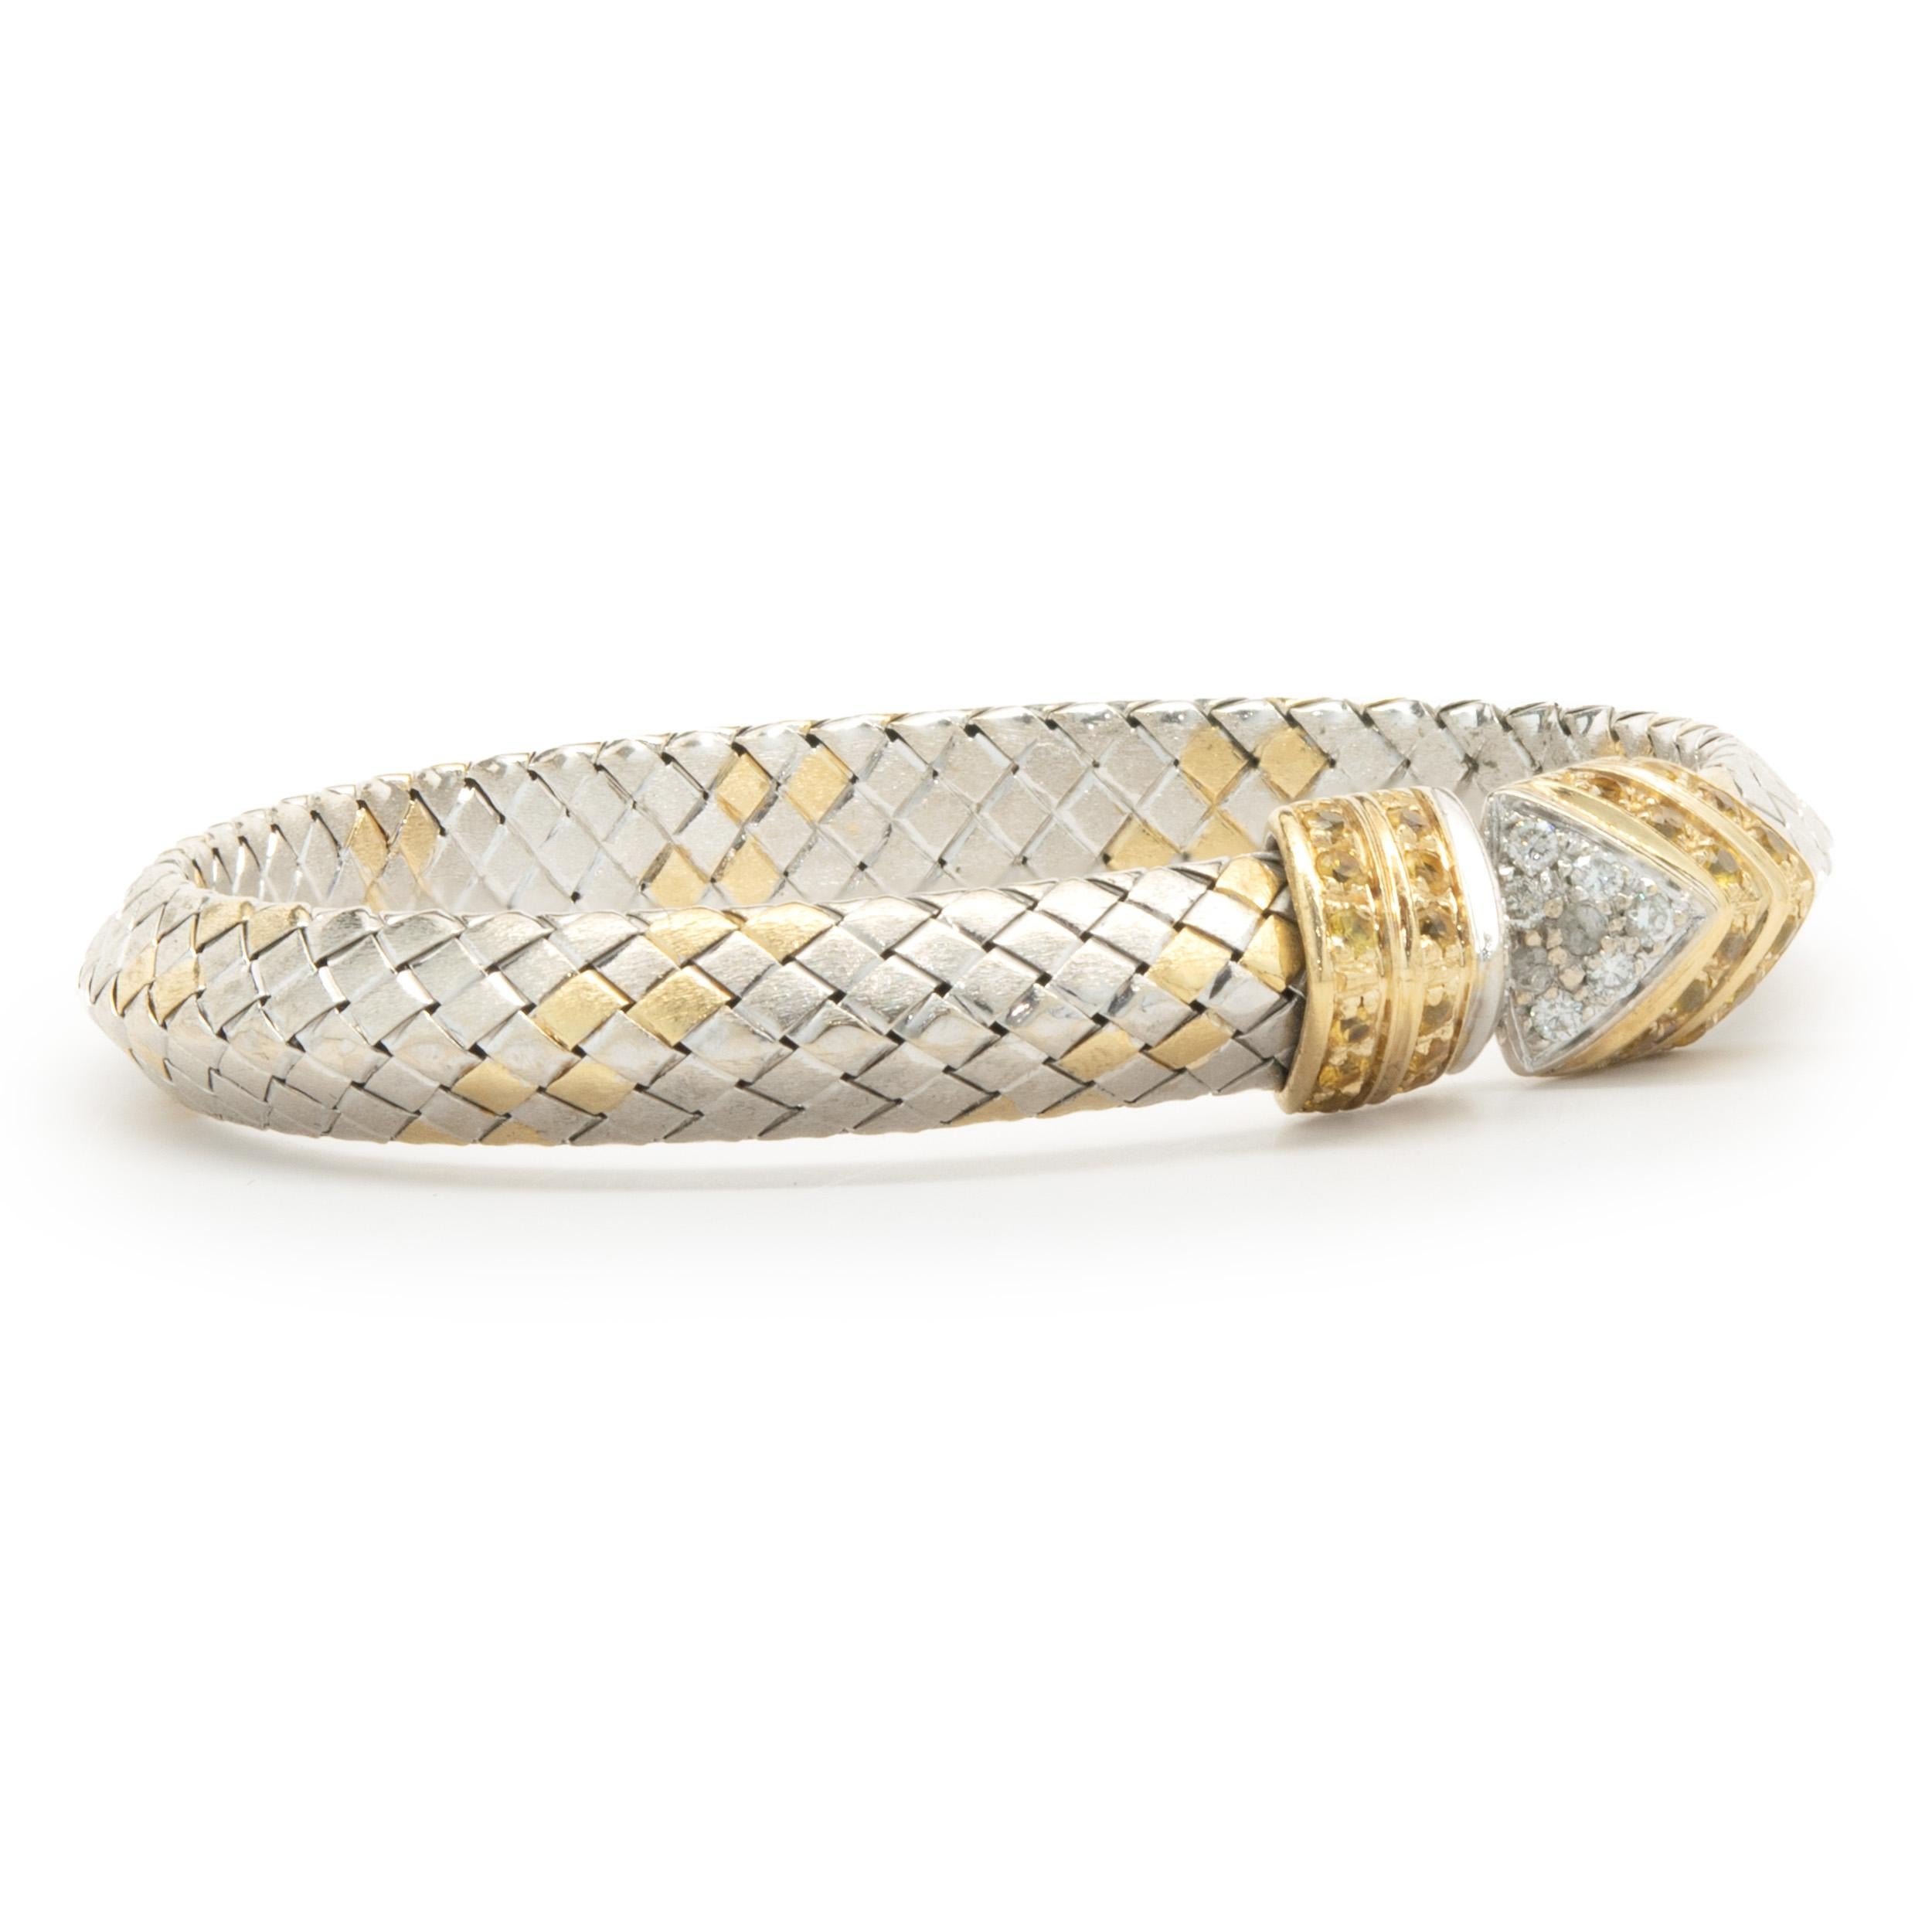 Designer: custom design
Material: 18K white & yellow gold
Diamonds: 16 round brilliant cut = 0.16cttw
Color: H
Clarity: SI2
Dimensions: bracelet will fit up to a 6.5-inch wrist
Weight: 29.91 grams